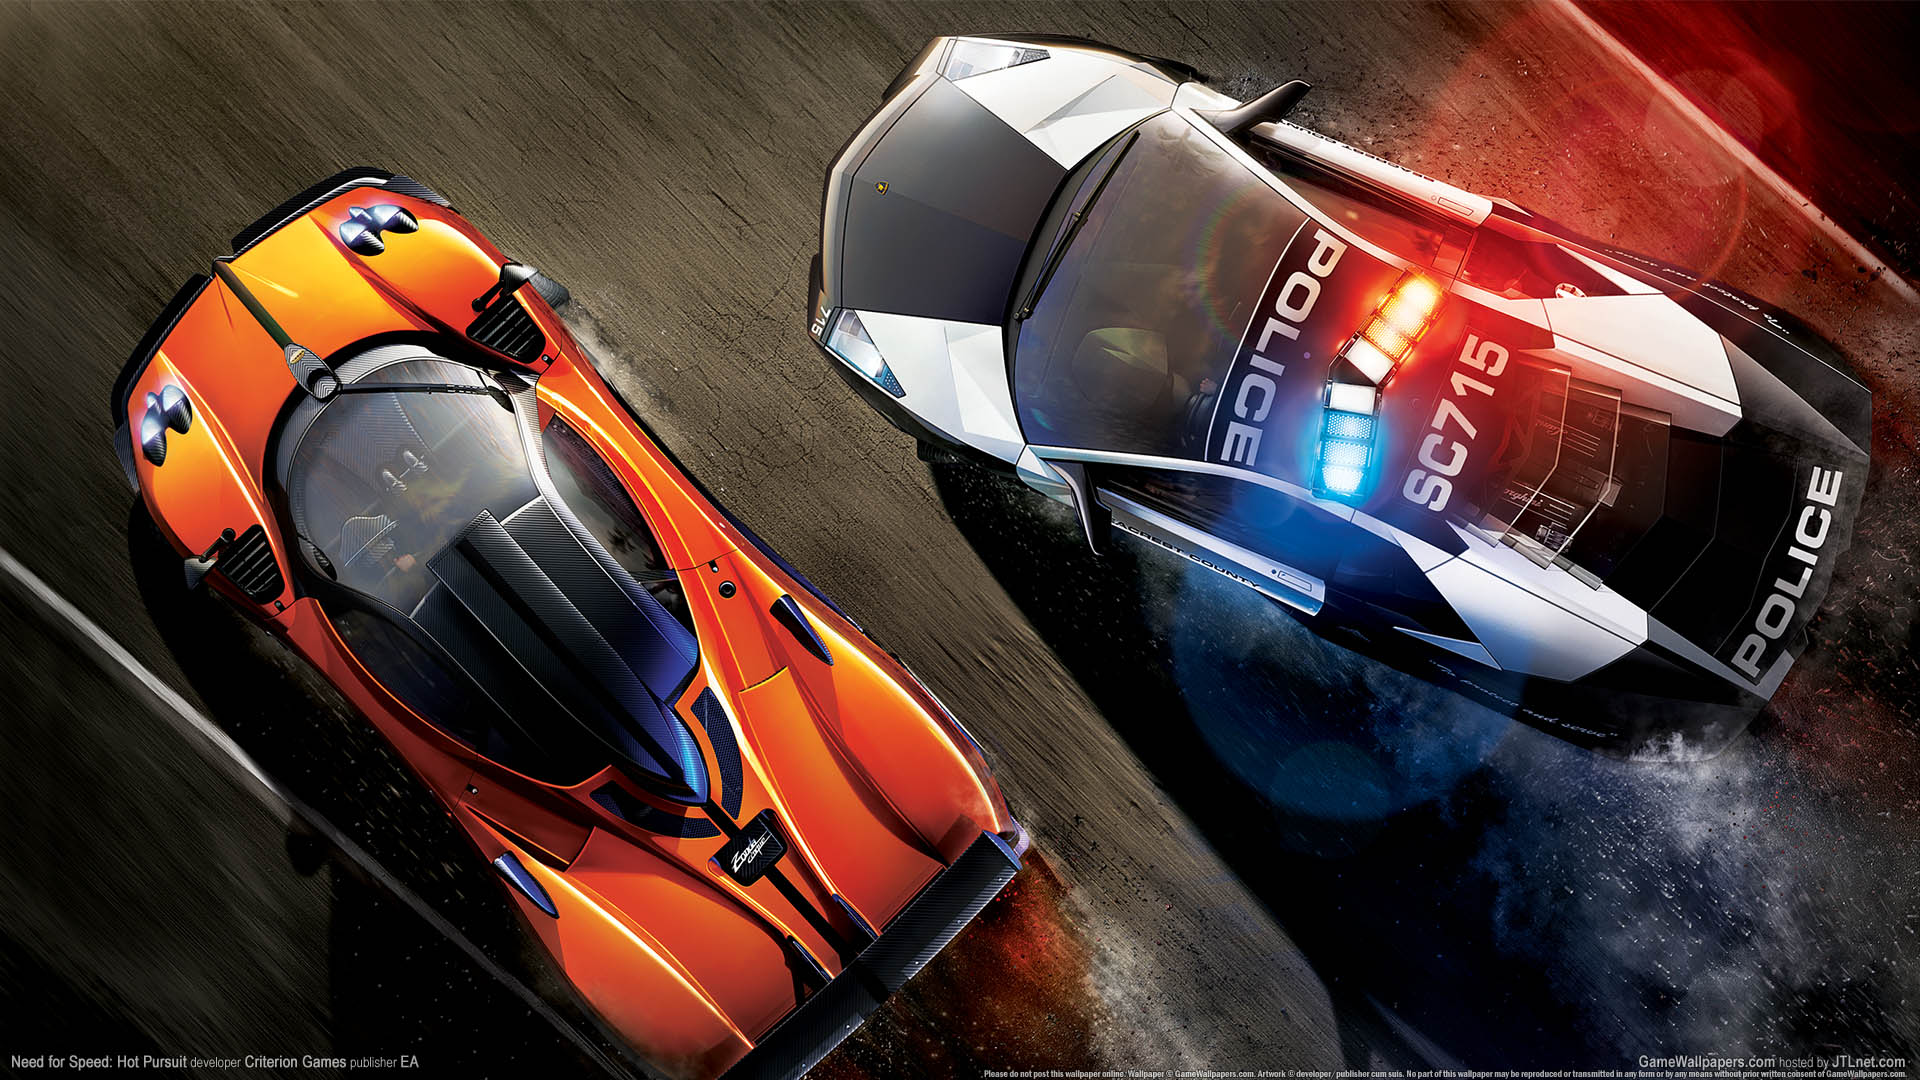 Need for Speed: Hot Pursuit fond d'cran 01 1920x1080